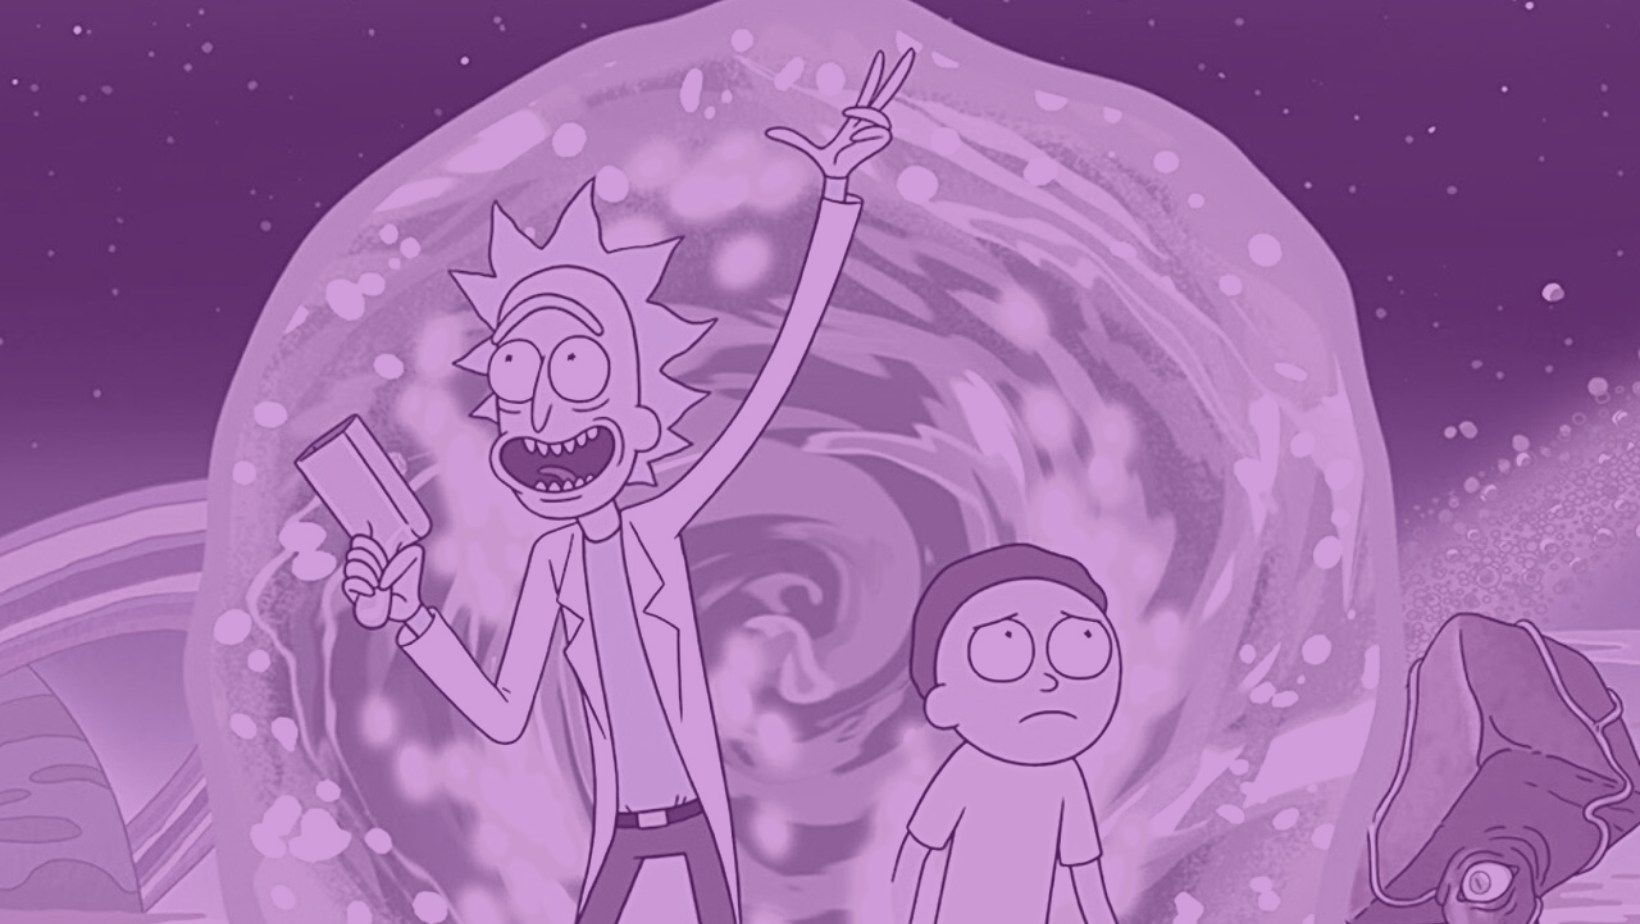 Rick and Morty are in a purple wormhole - Rick and Morty